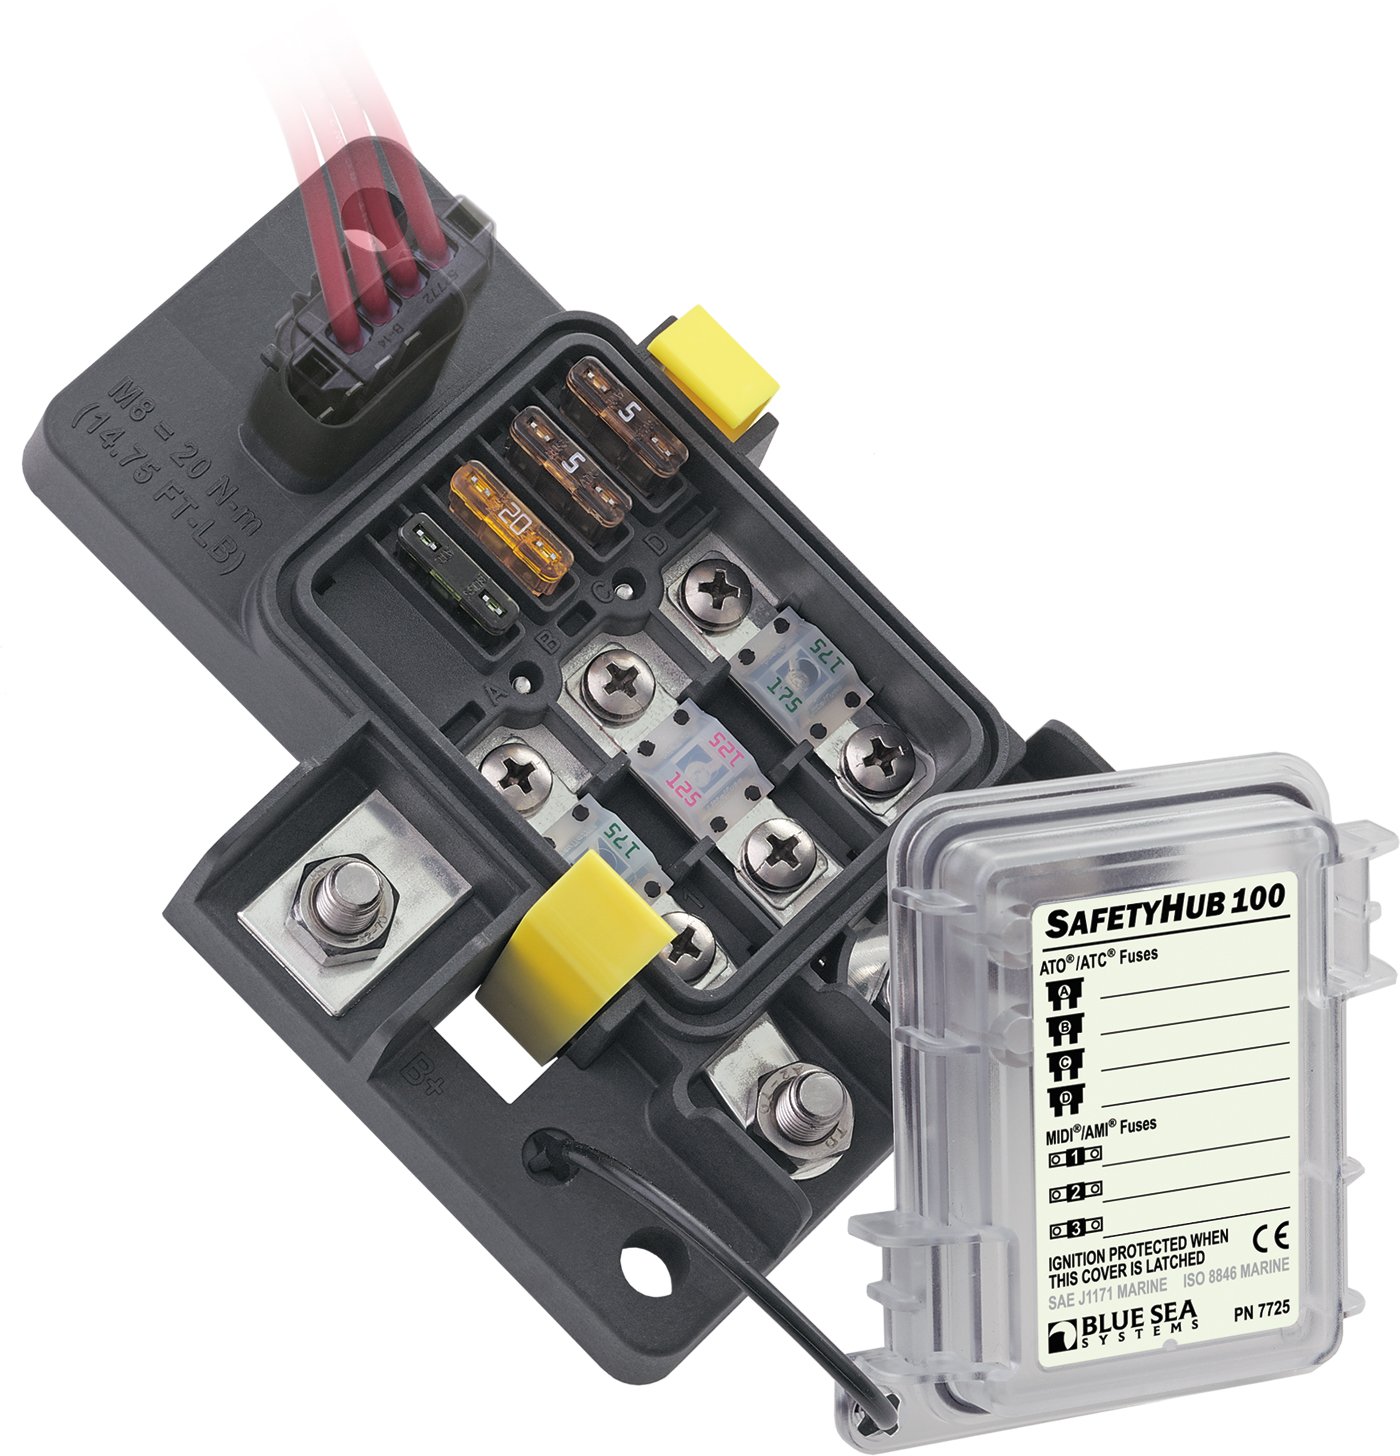 Can the Blue Sea 7725 Safety Hub 100 satisfy the "fuse within 7" of the house battery (200 Ah, 1AWG cable) if connected with a short enough cable, or do you still need a separate fuse between it and the battery?